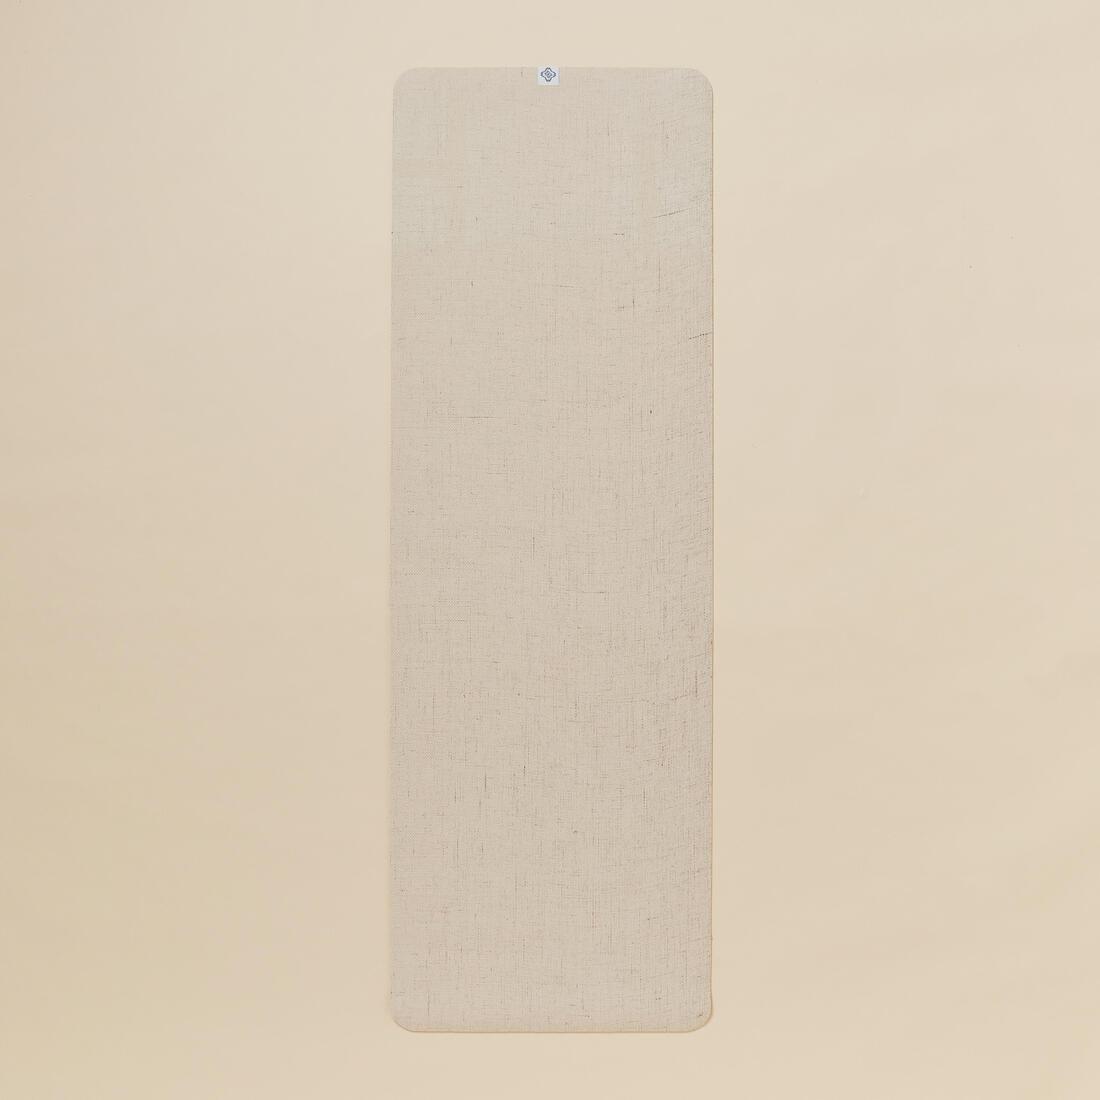 KIMJALY 183 cm x 61 cm x 4 mm Jute and Natural Rubber Yoga Mat, Eggshell